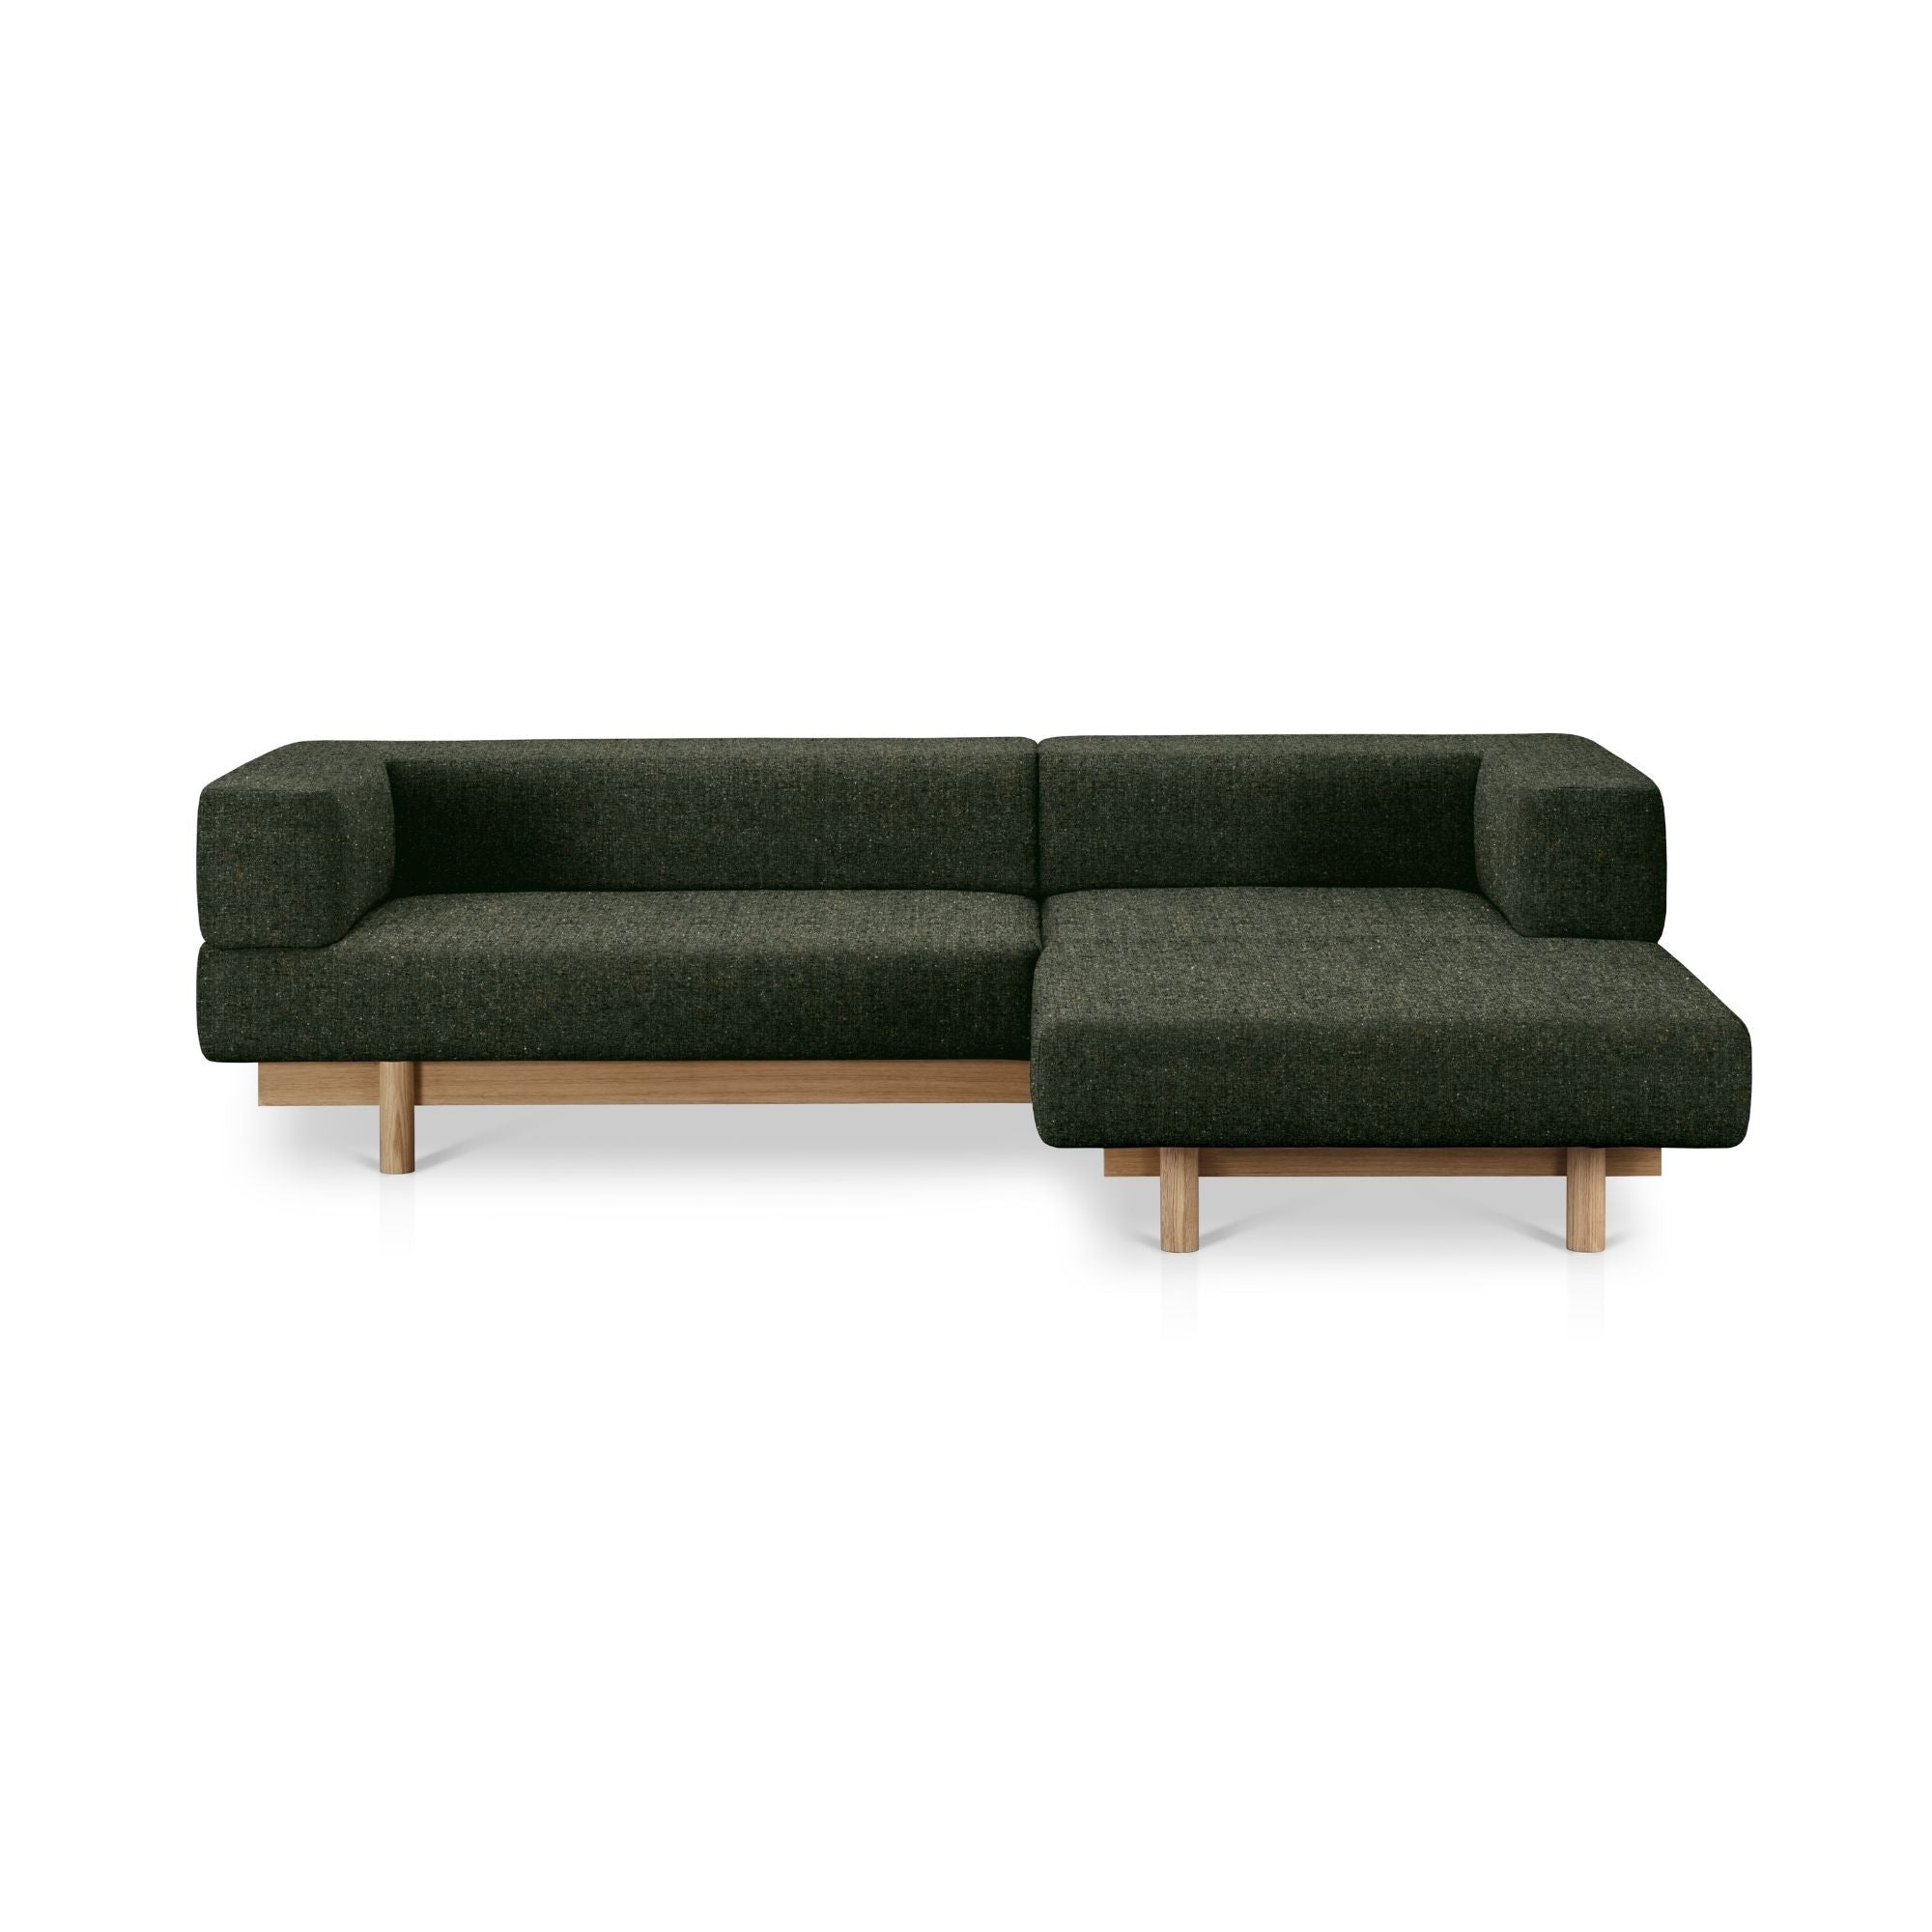 Alchemist Sofa with Chaise Lounge - THAT COOL LIVING